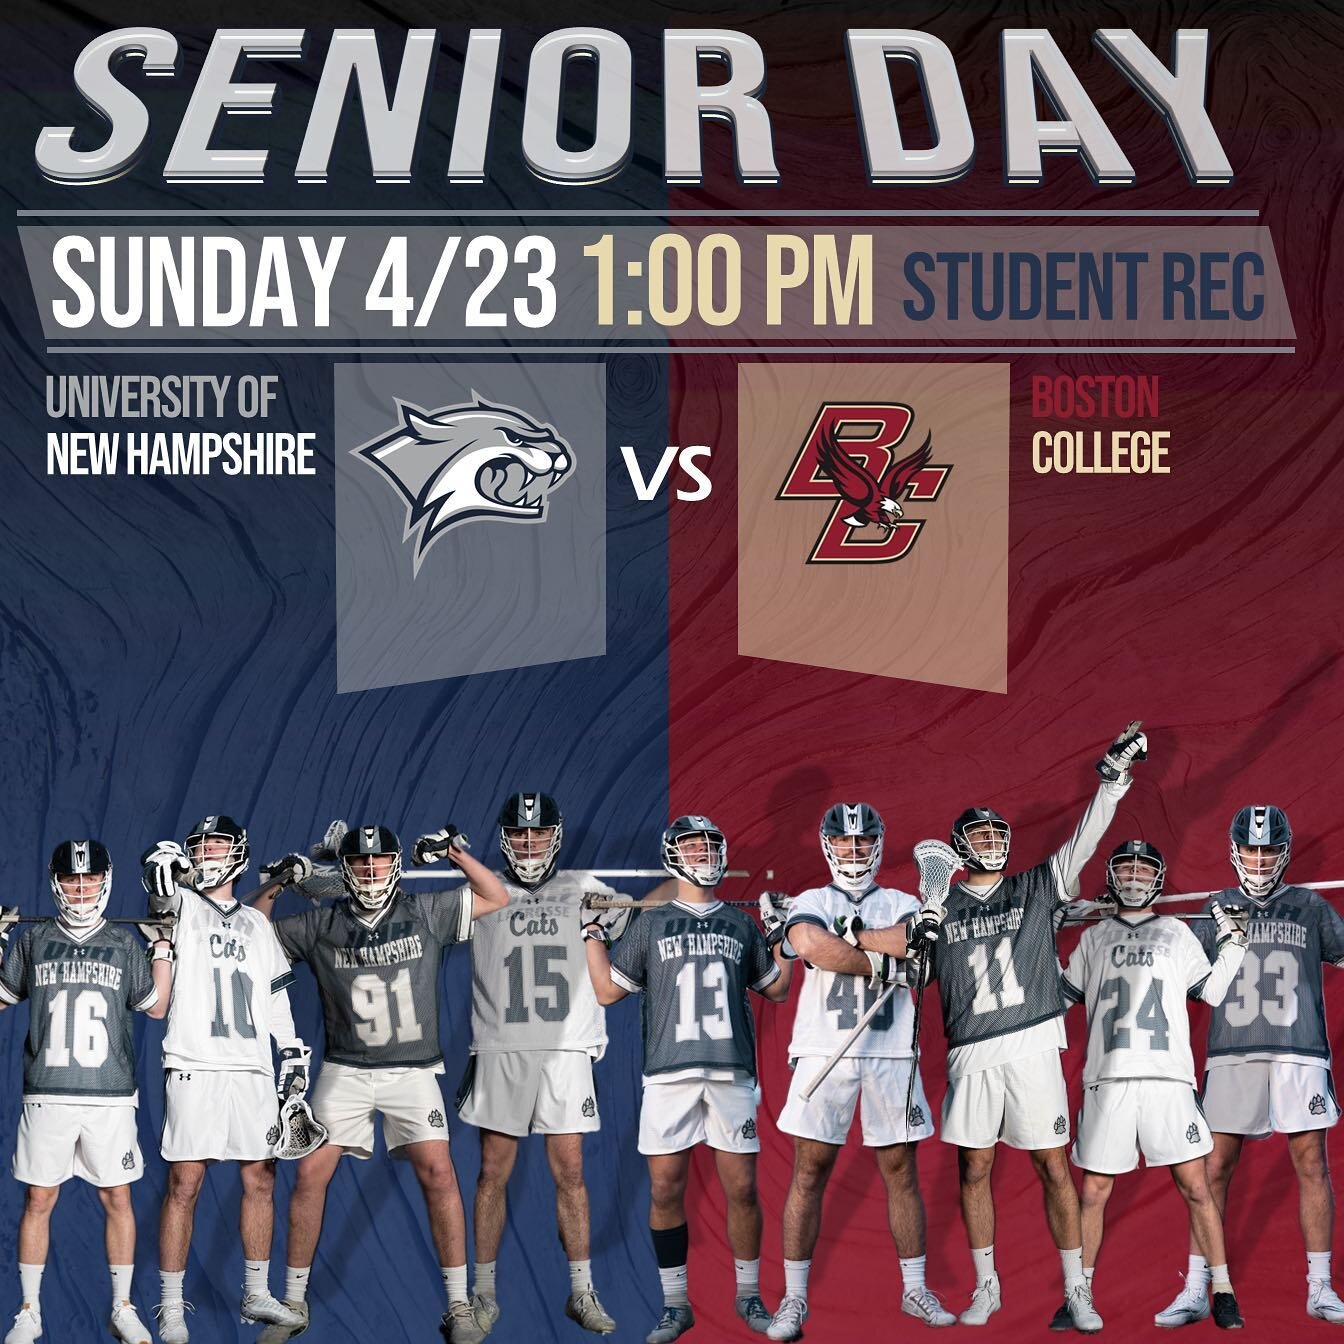 Tomorrow we celebrate our seniors in the last matchup of the regular season against BC. #gocats #clc